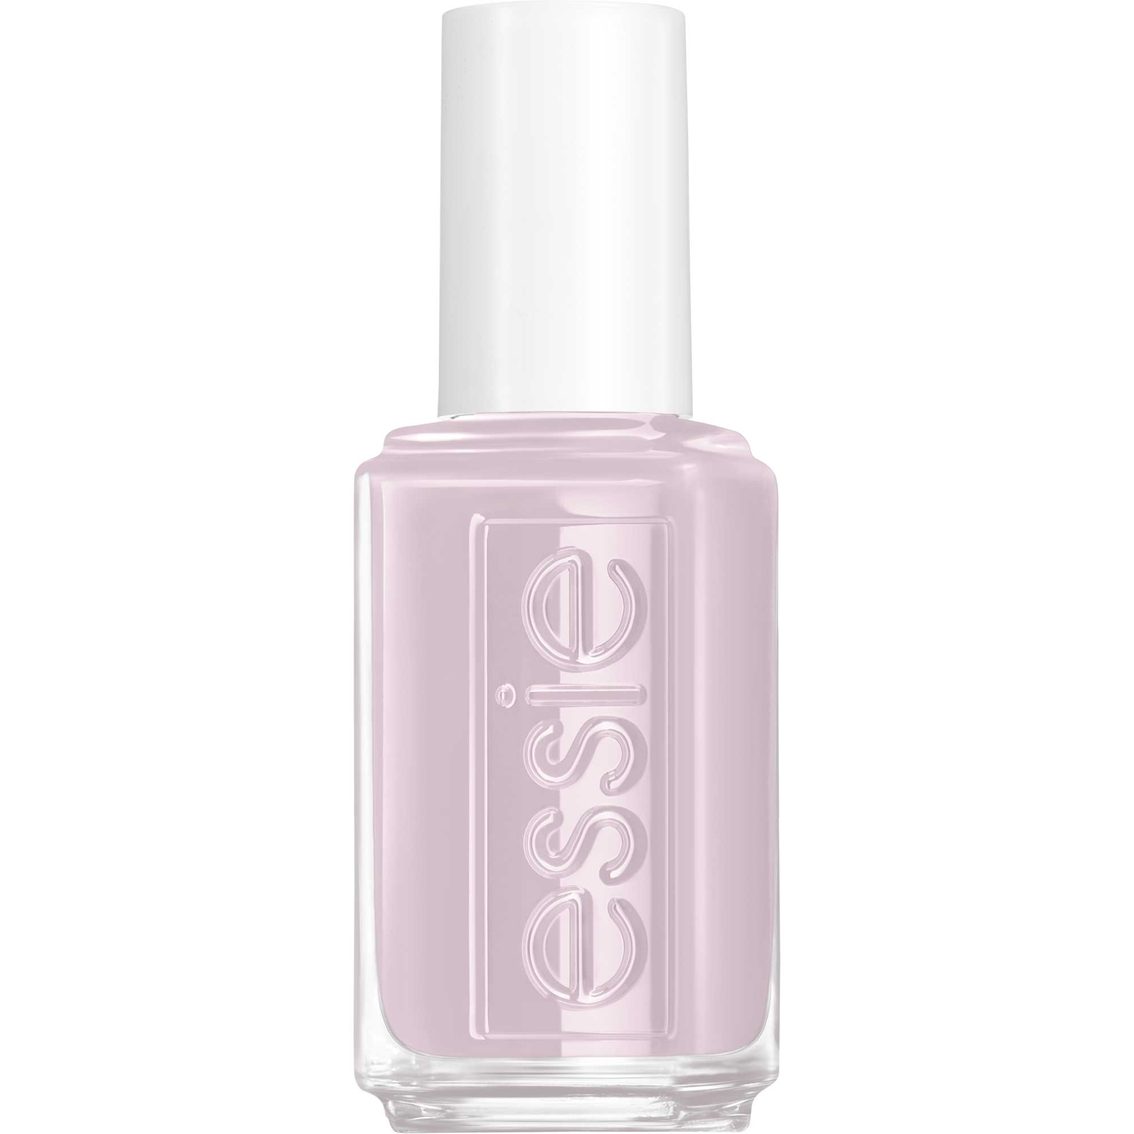 Essie Expressie Quick-Dry Pink Crave The Chaos Nail Polish - Image 2 of 8